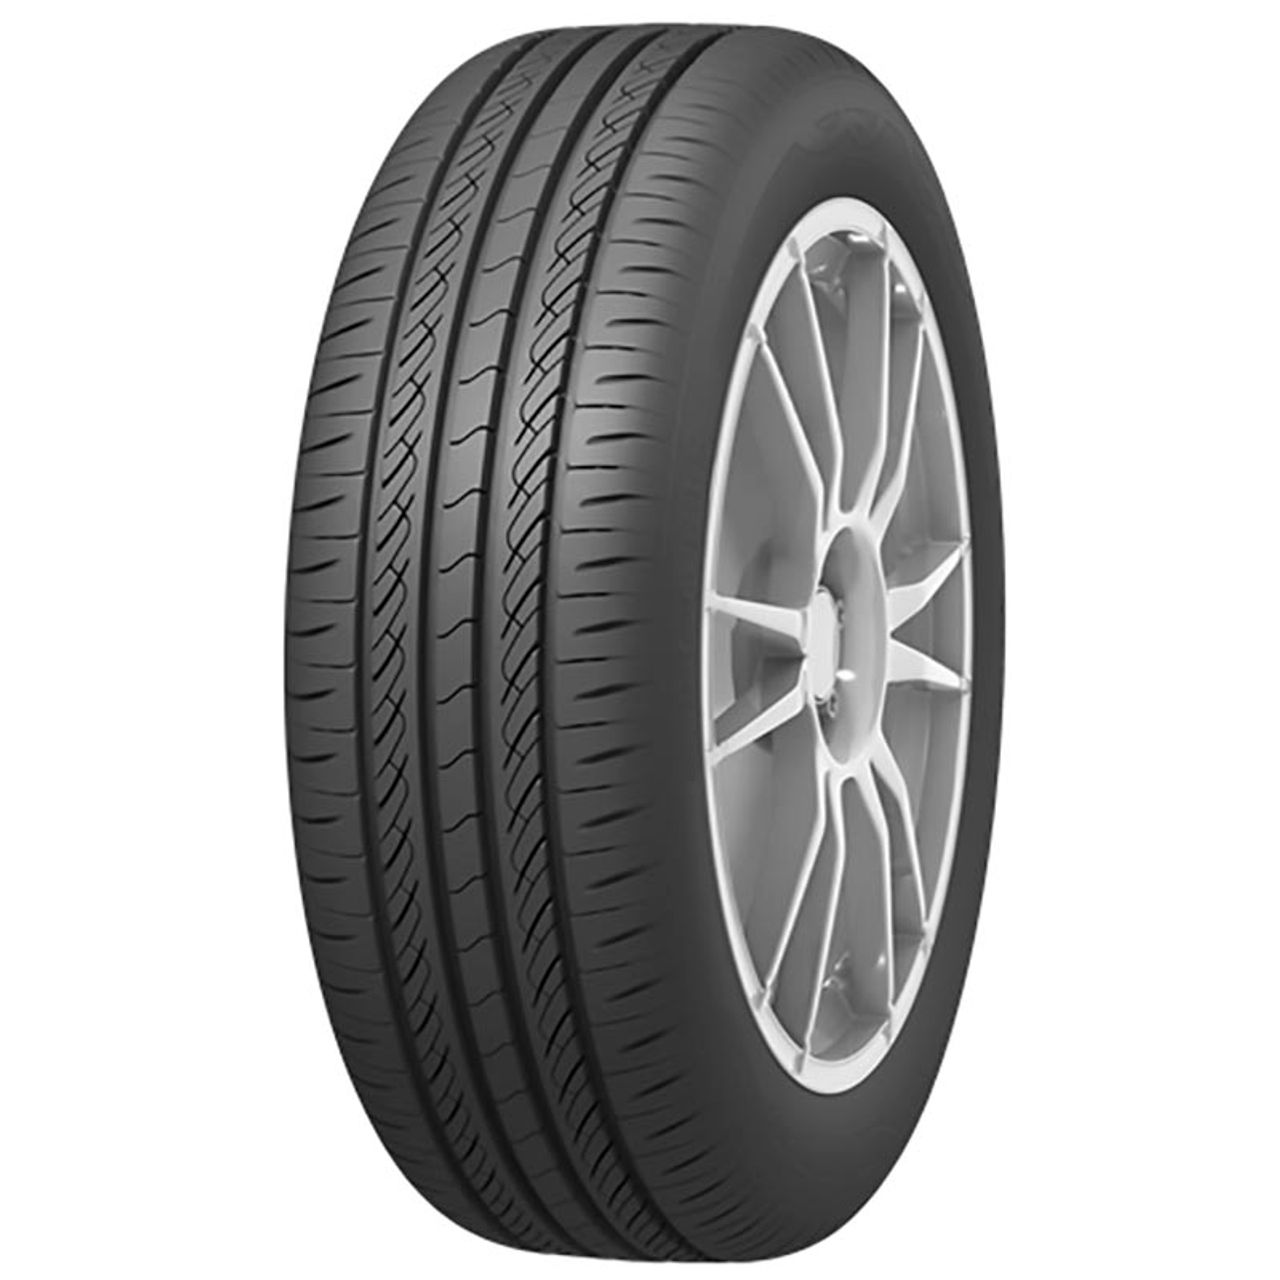 INFINITY ECOSIS 195/55R15 85V BSW